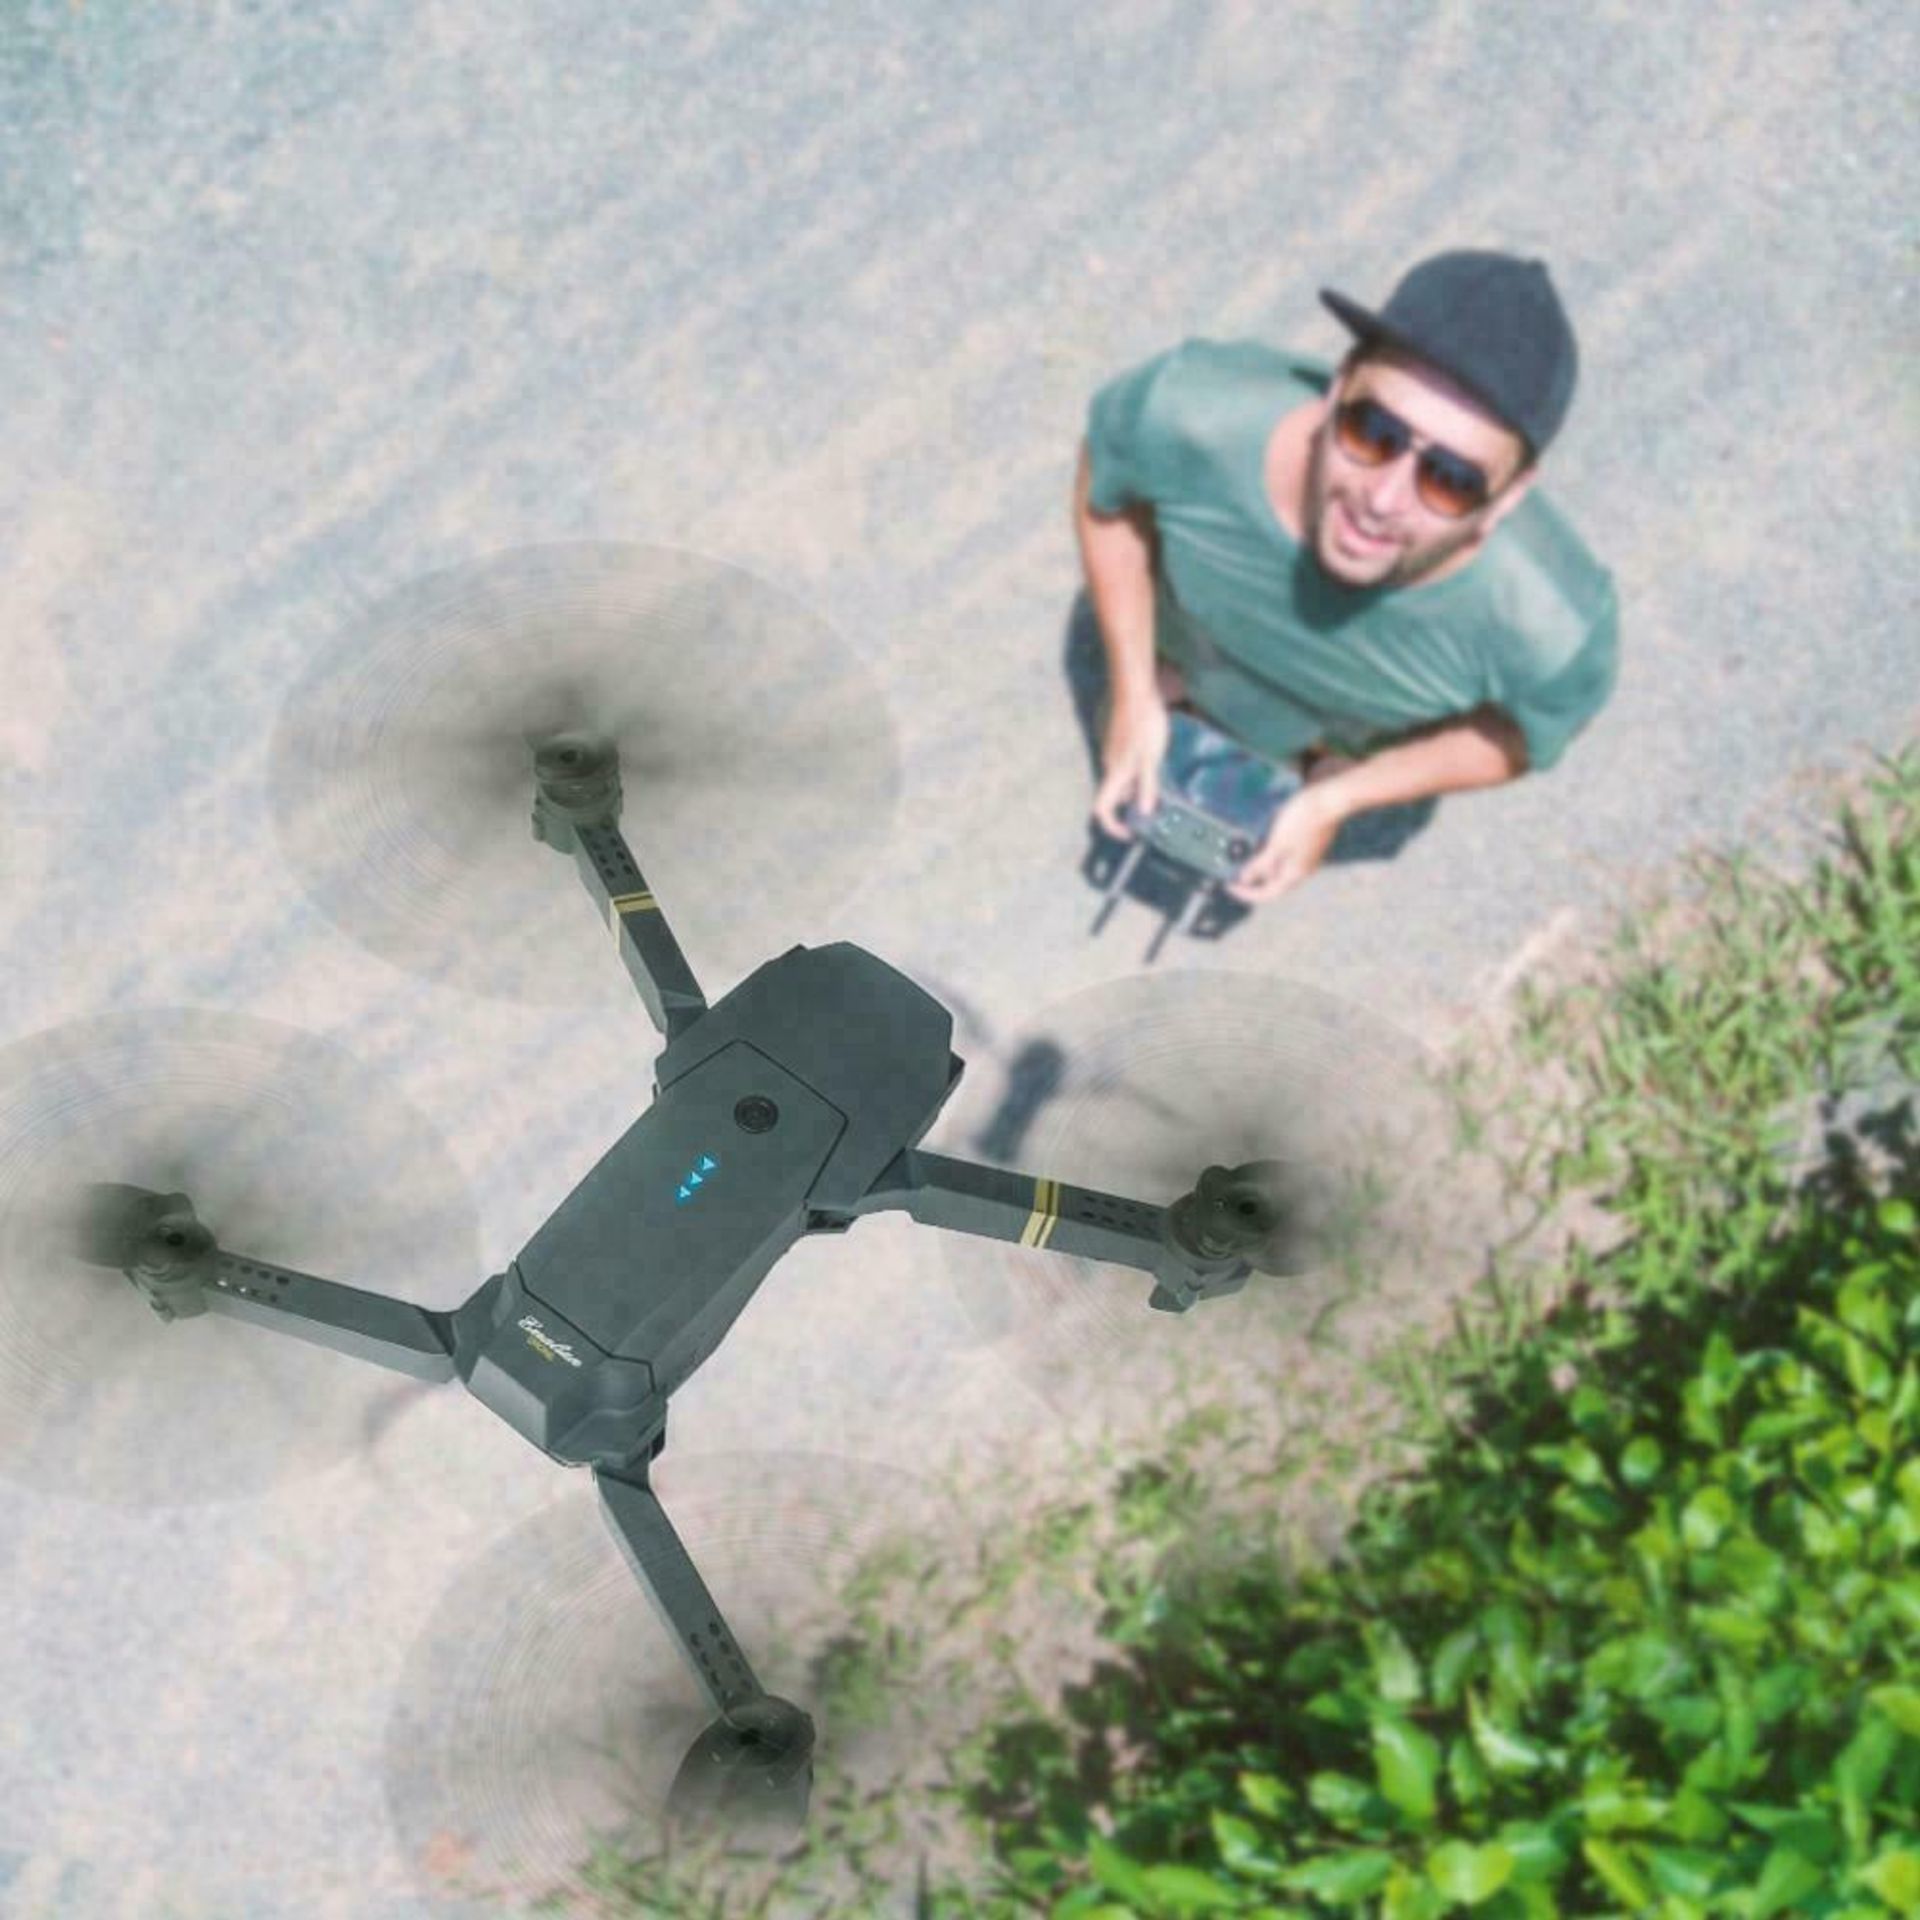 DRONE X REMOTE CONTROL QUADCOPTER 1080P HD CAMERA - THE LATEST TECH ONLY 7 OF THESE LEFT! - Image 8 of 9